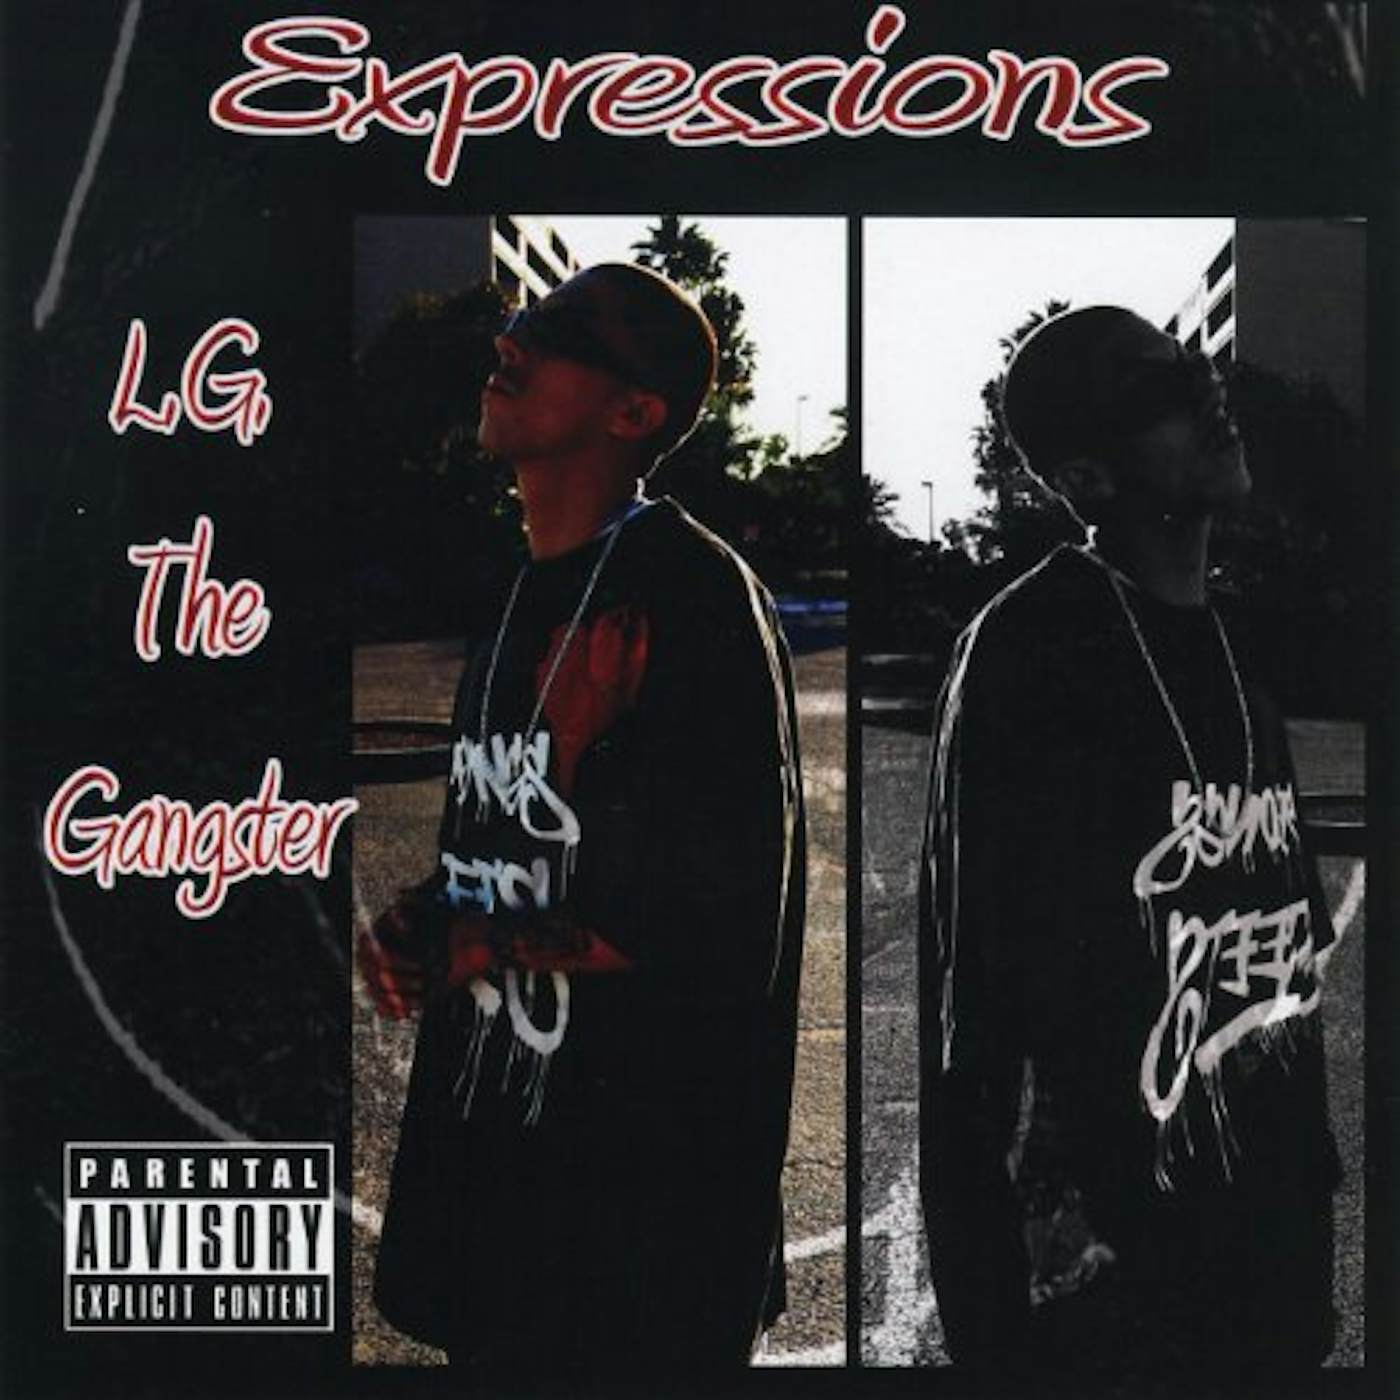 LG The Gangster EXPRESSIONS CD